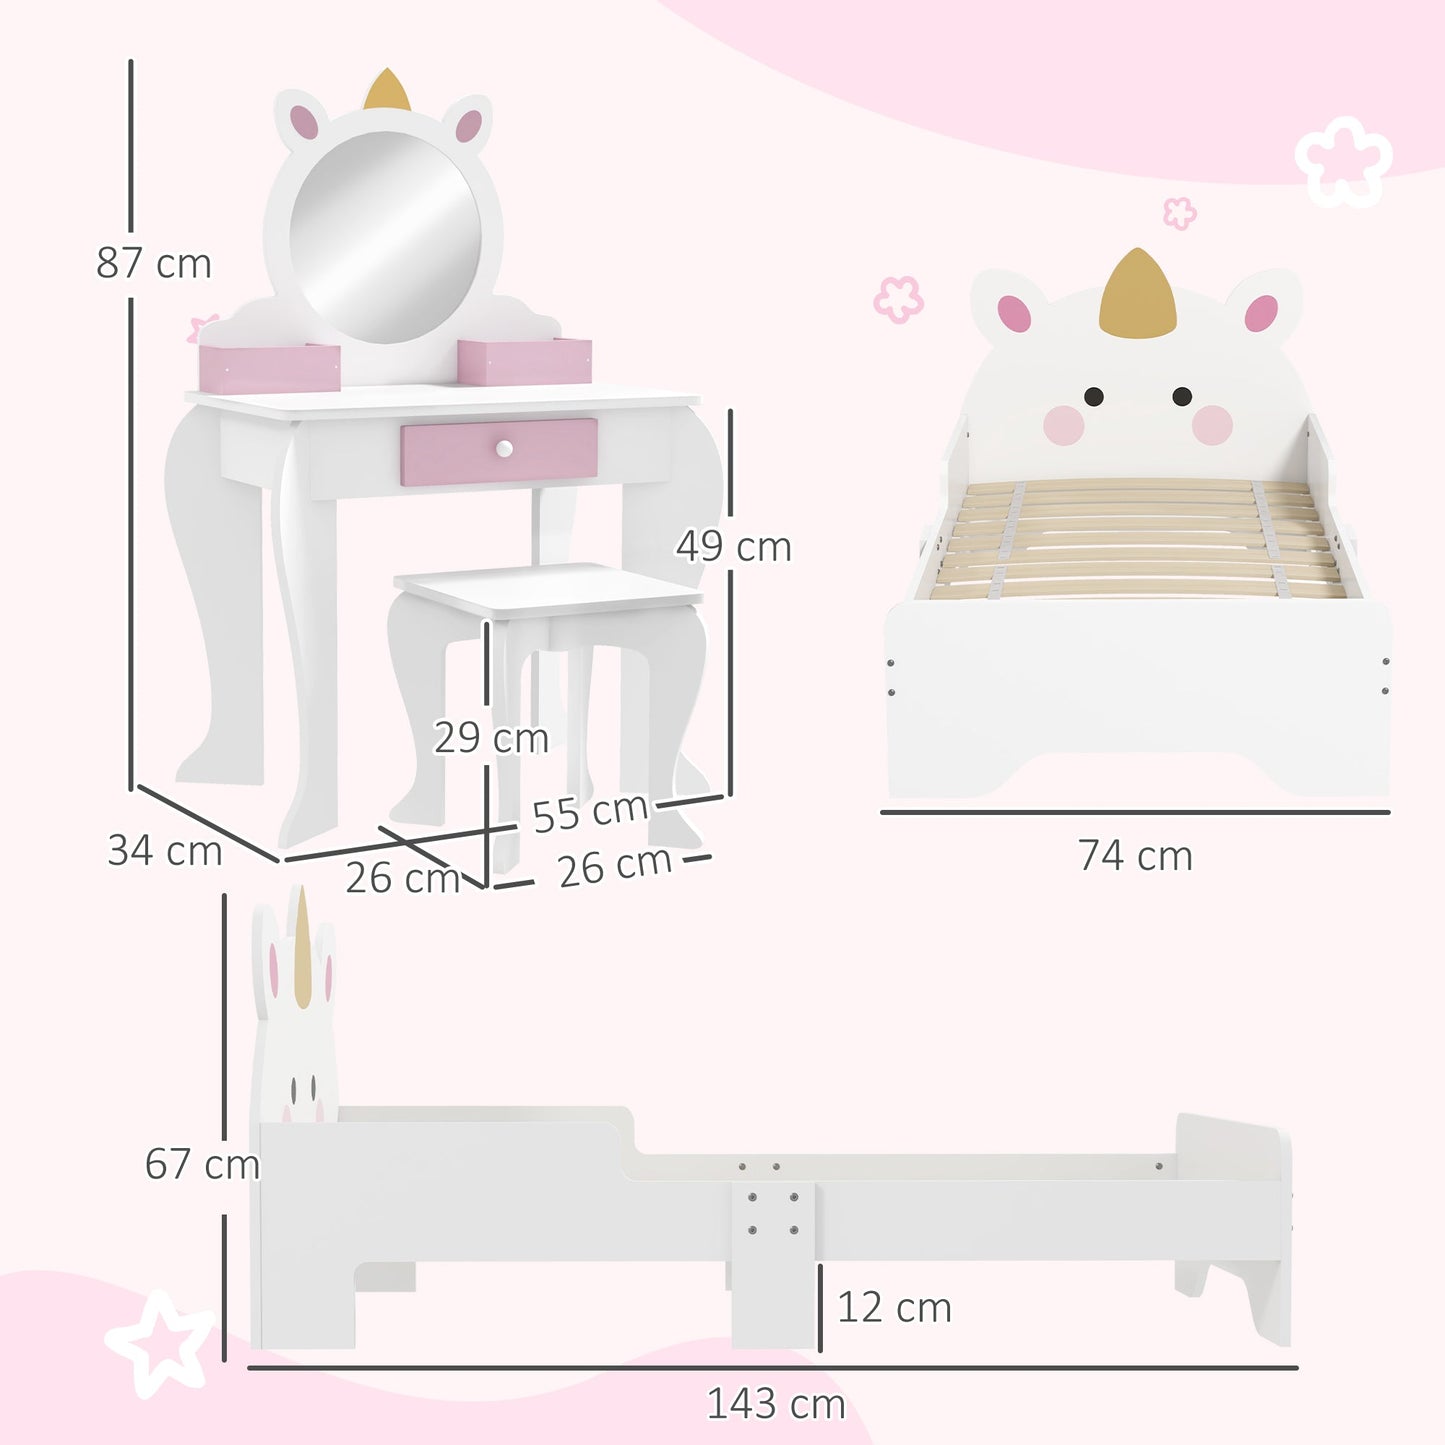 ZONEKIZ Kids Bedroom Furniture Set with Kids Dressing Table with Mirror and Stool, Toddler Bed Frame for 3-6 Years, Unicorn Design